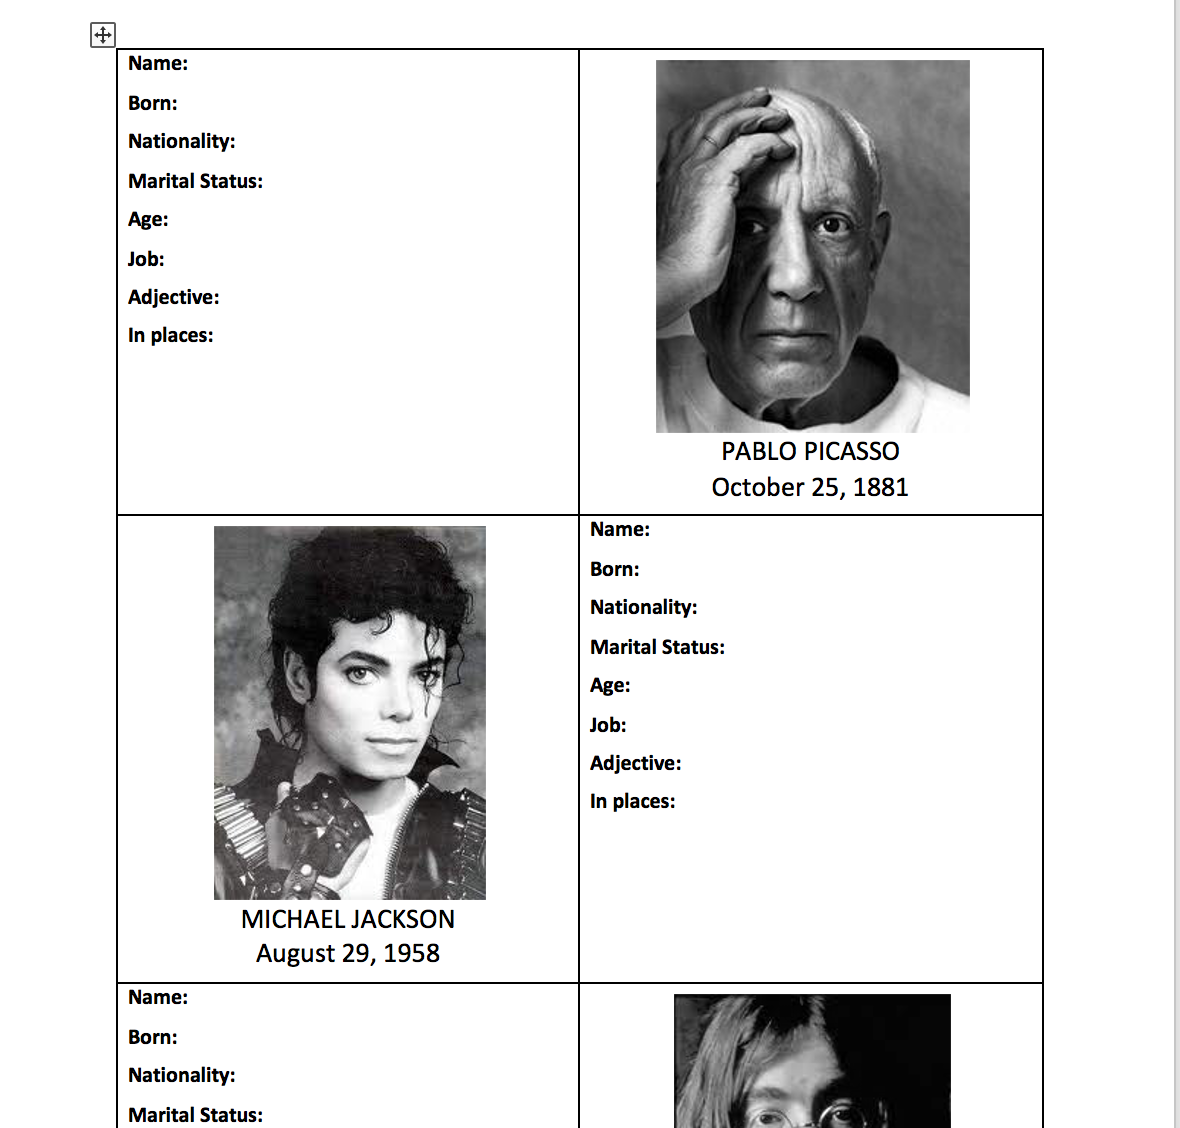 biographies with worksheets